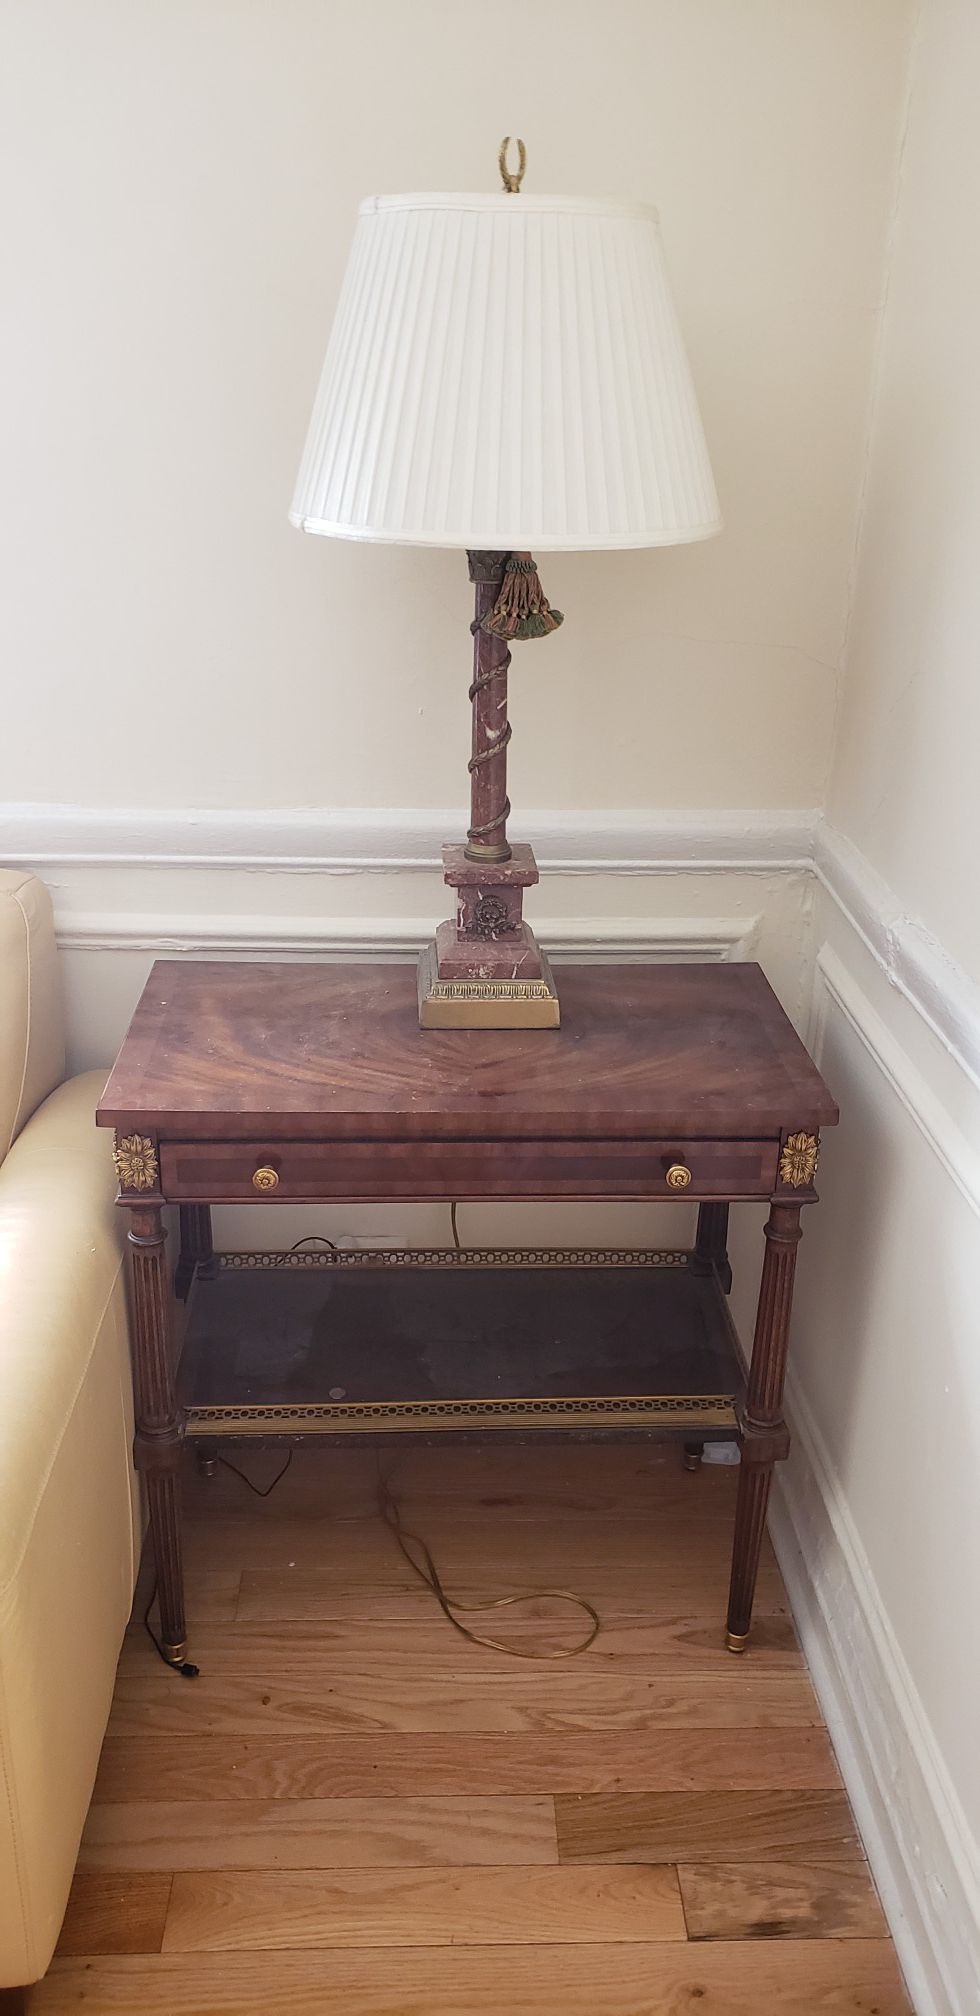 Antique end table and lamp